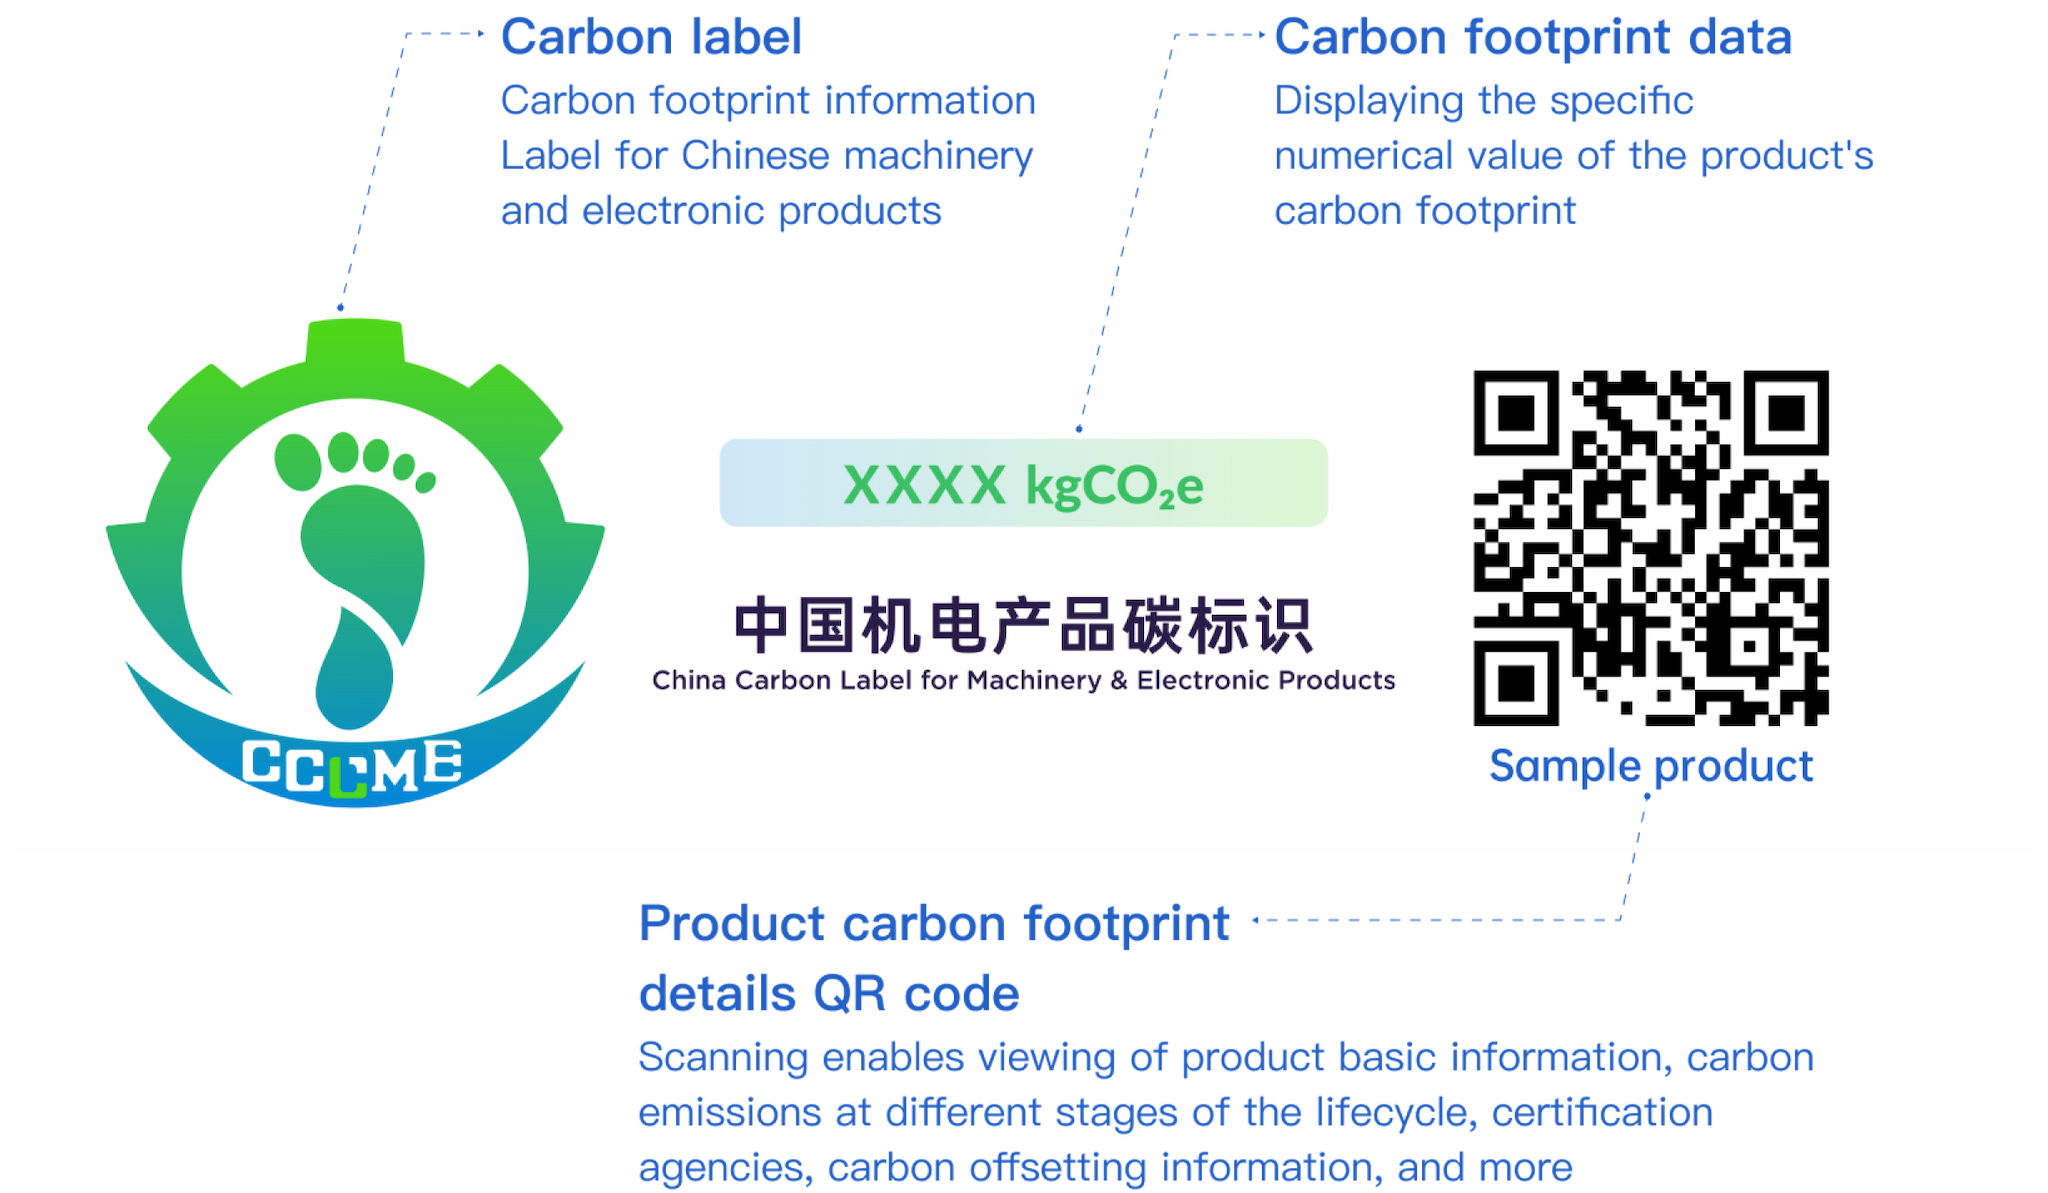 China Carbon Label for Machinery & Electronic Products